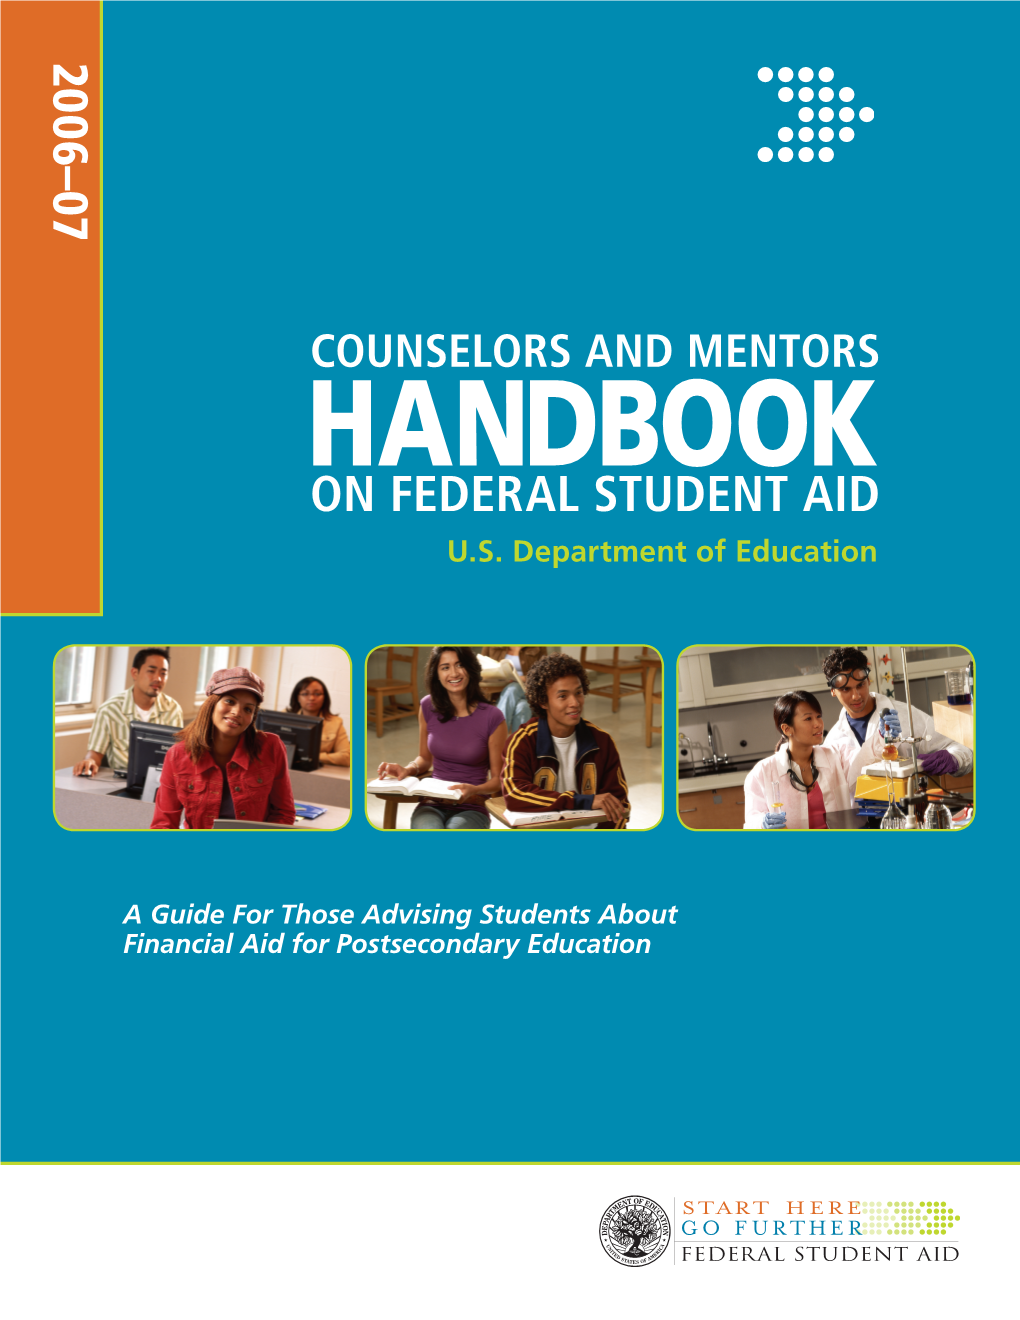 Counselors and Mentors Handbook on Federal Student Aid U.S